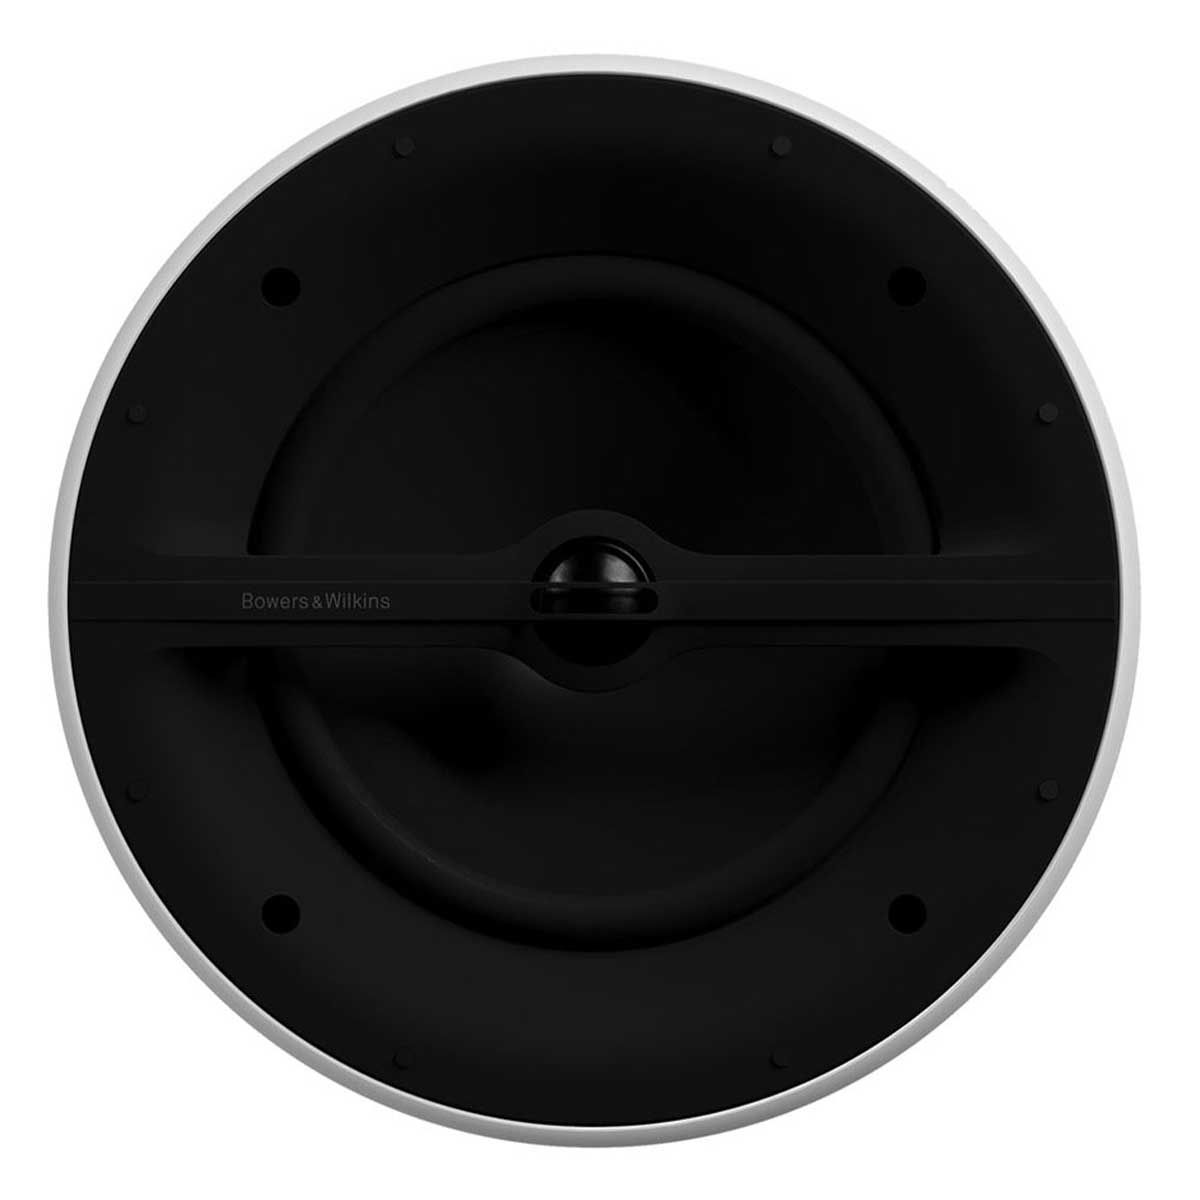 Bowers & Wilkins Flexible Series CCM382 In-ceiling speaker without grill